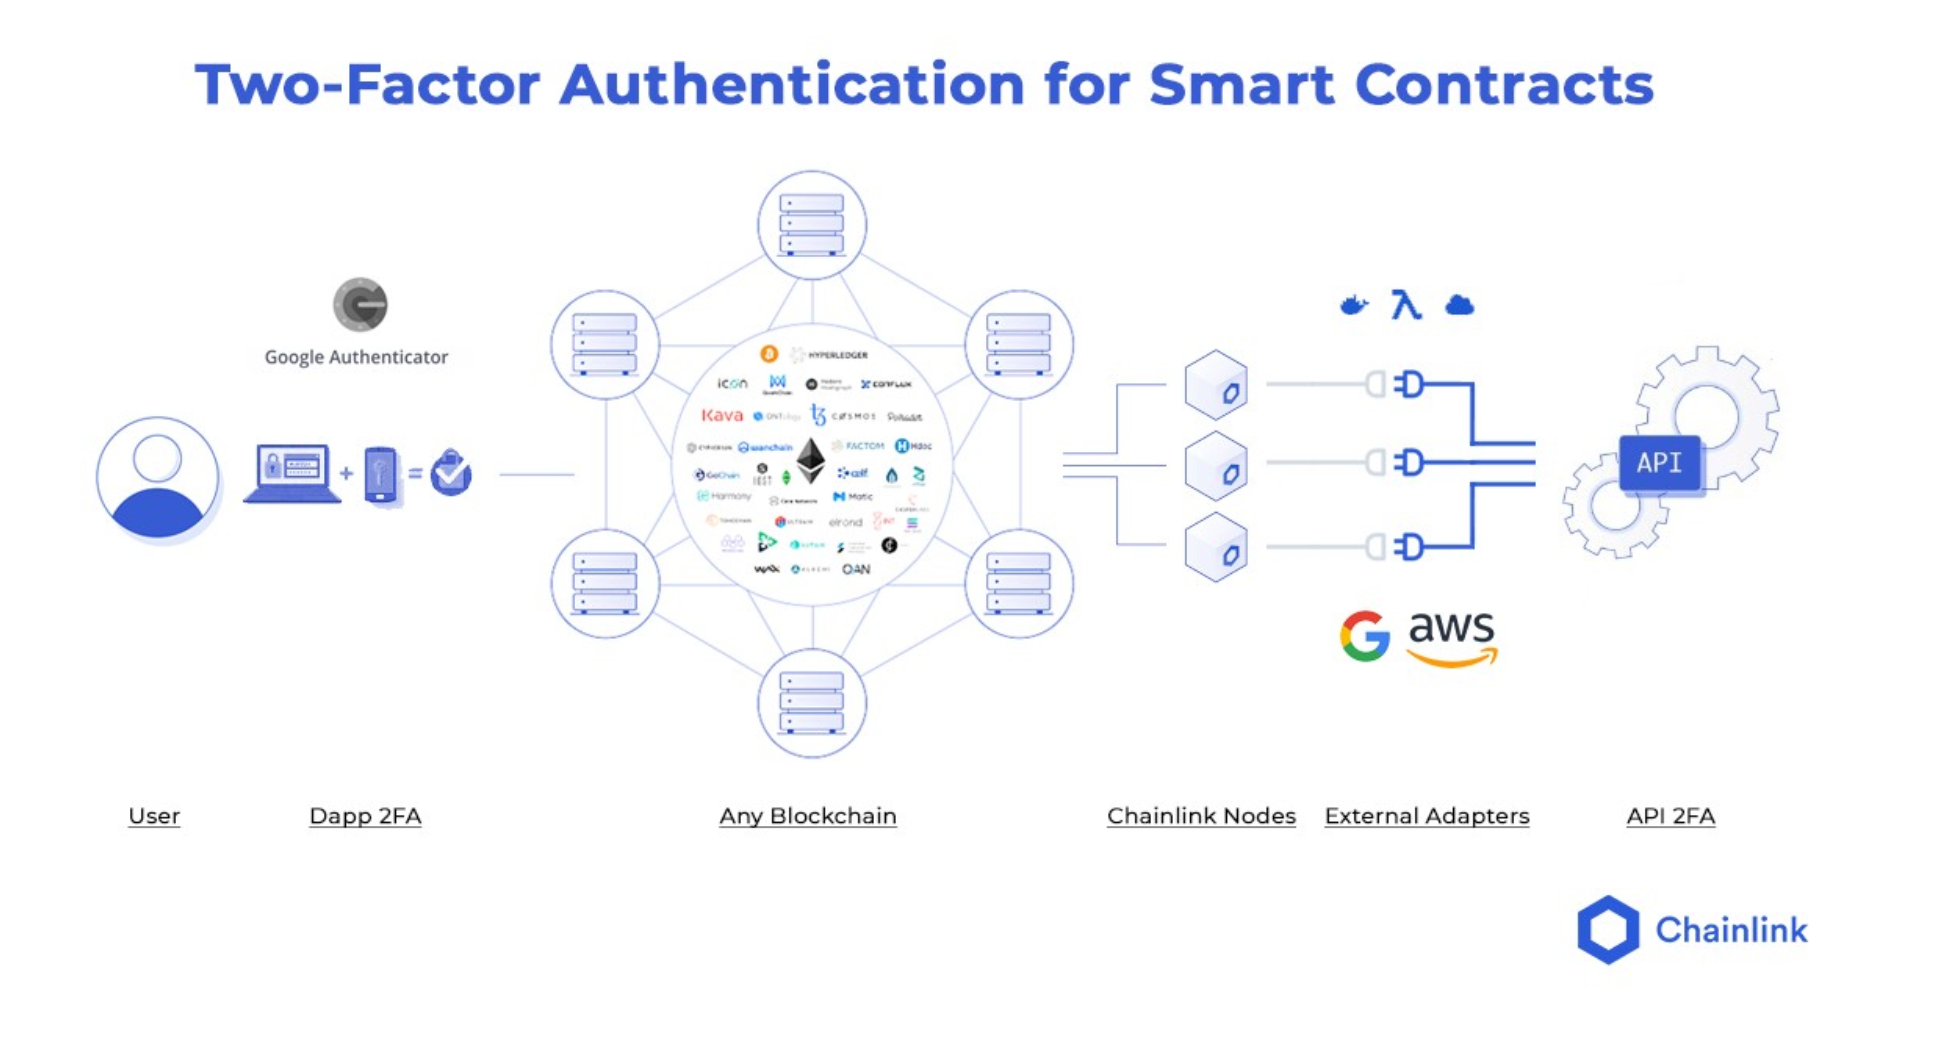 Digital Bridge uses Chainlink oracles to enable smart contracts secured by 2 Factor Authentication services